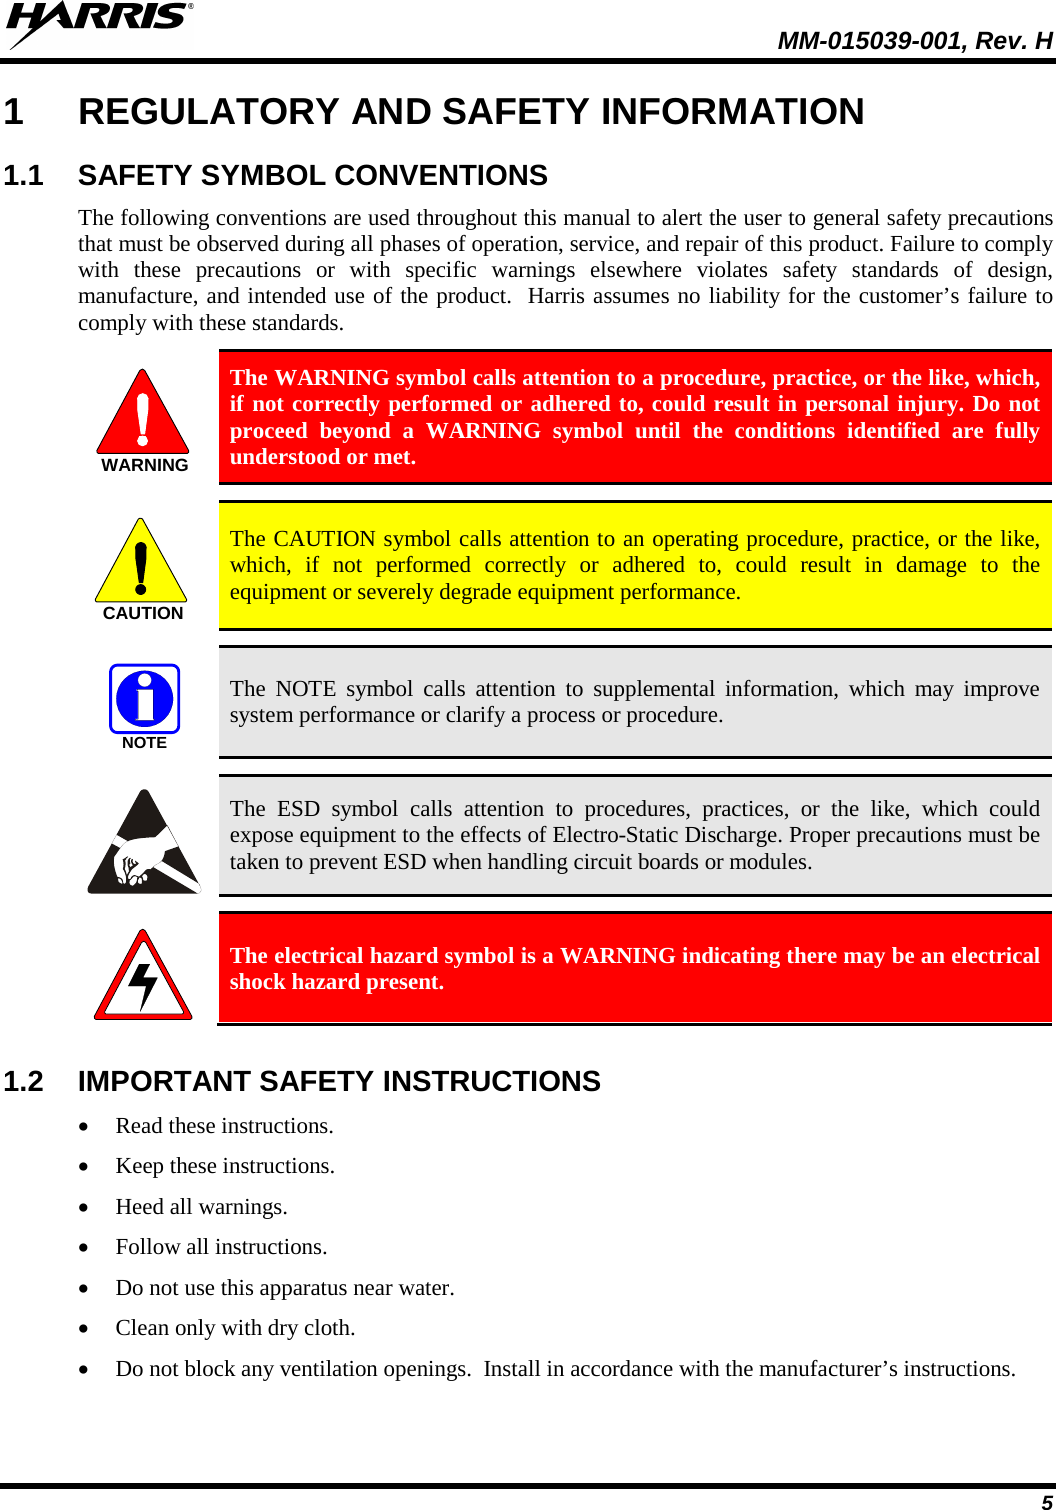   MM-015039-001, Rev. H 5 1  REGULATORY AND SAFETY INFORMATION 1.1 SAFETY SYMBOL CONVENTIONS The following conventions are used throughout this manual to alert the user to general safety precautions that must be observed during all phases of operation, service, and repair of this product. Failure to comply with these precautions or with specific warnings elsewhere violates safety standards of design, manufacture, and intended use of the product.  Harris assumes no liability for the customer’s failure to comply with these standards.  The WARNING symbol calls attention to a procedure, practice, or the like, which, if not correctly performed or adhered to, could result in personal injury. Do not proceed beyond a WARNING symbol until the conditions identified are fully understood or met.    The CAUTION symbol calls attention to an operating procedure, practice, or the like, which, if not performed correctly or adhered to, could result in damage to the equipment or severely degrade equipment performance.    The NOTE symbol calls attention to supplemental information, which may improve system performance or clarify a process or procedure.    The ESD symbol calls attention to procedures, practices, or the like, which could expose equipment to the effects of Electro-Static Discharge. Proper precautions must be taken to prevent ESD when handling circuit boards or modules.    The electrical hazard symbol is a WARNING indicating there may be an electrical shock hazard present.  1.2 IMPORTANT SAFETY INSTRUCTIONS • Read these instructions. • Keep these instructions. • Heed all warnings. • Follow all instructions. • Do not use this apparatus near water. • Clean only with dry cloth. • Do not block any ventilation openings.  Install in accordance with the manufacturer’s instructions. WARNINGCAUTIONNOTE